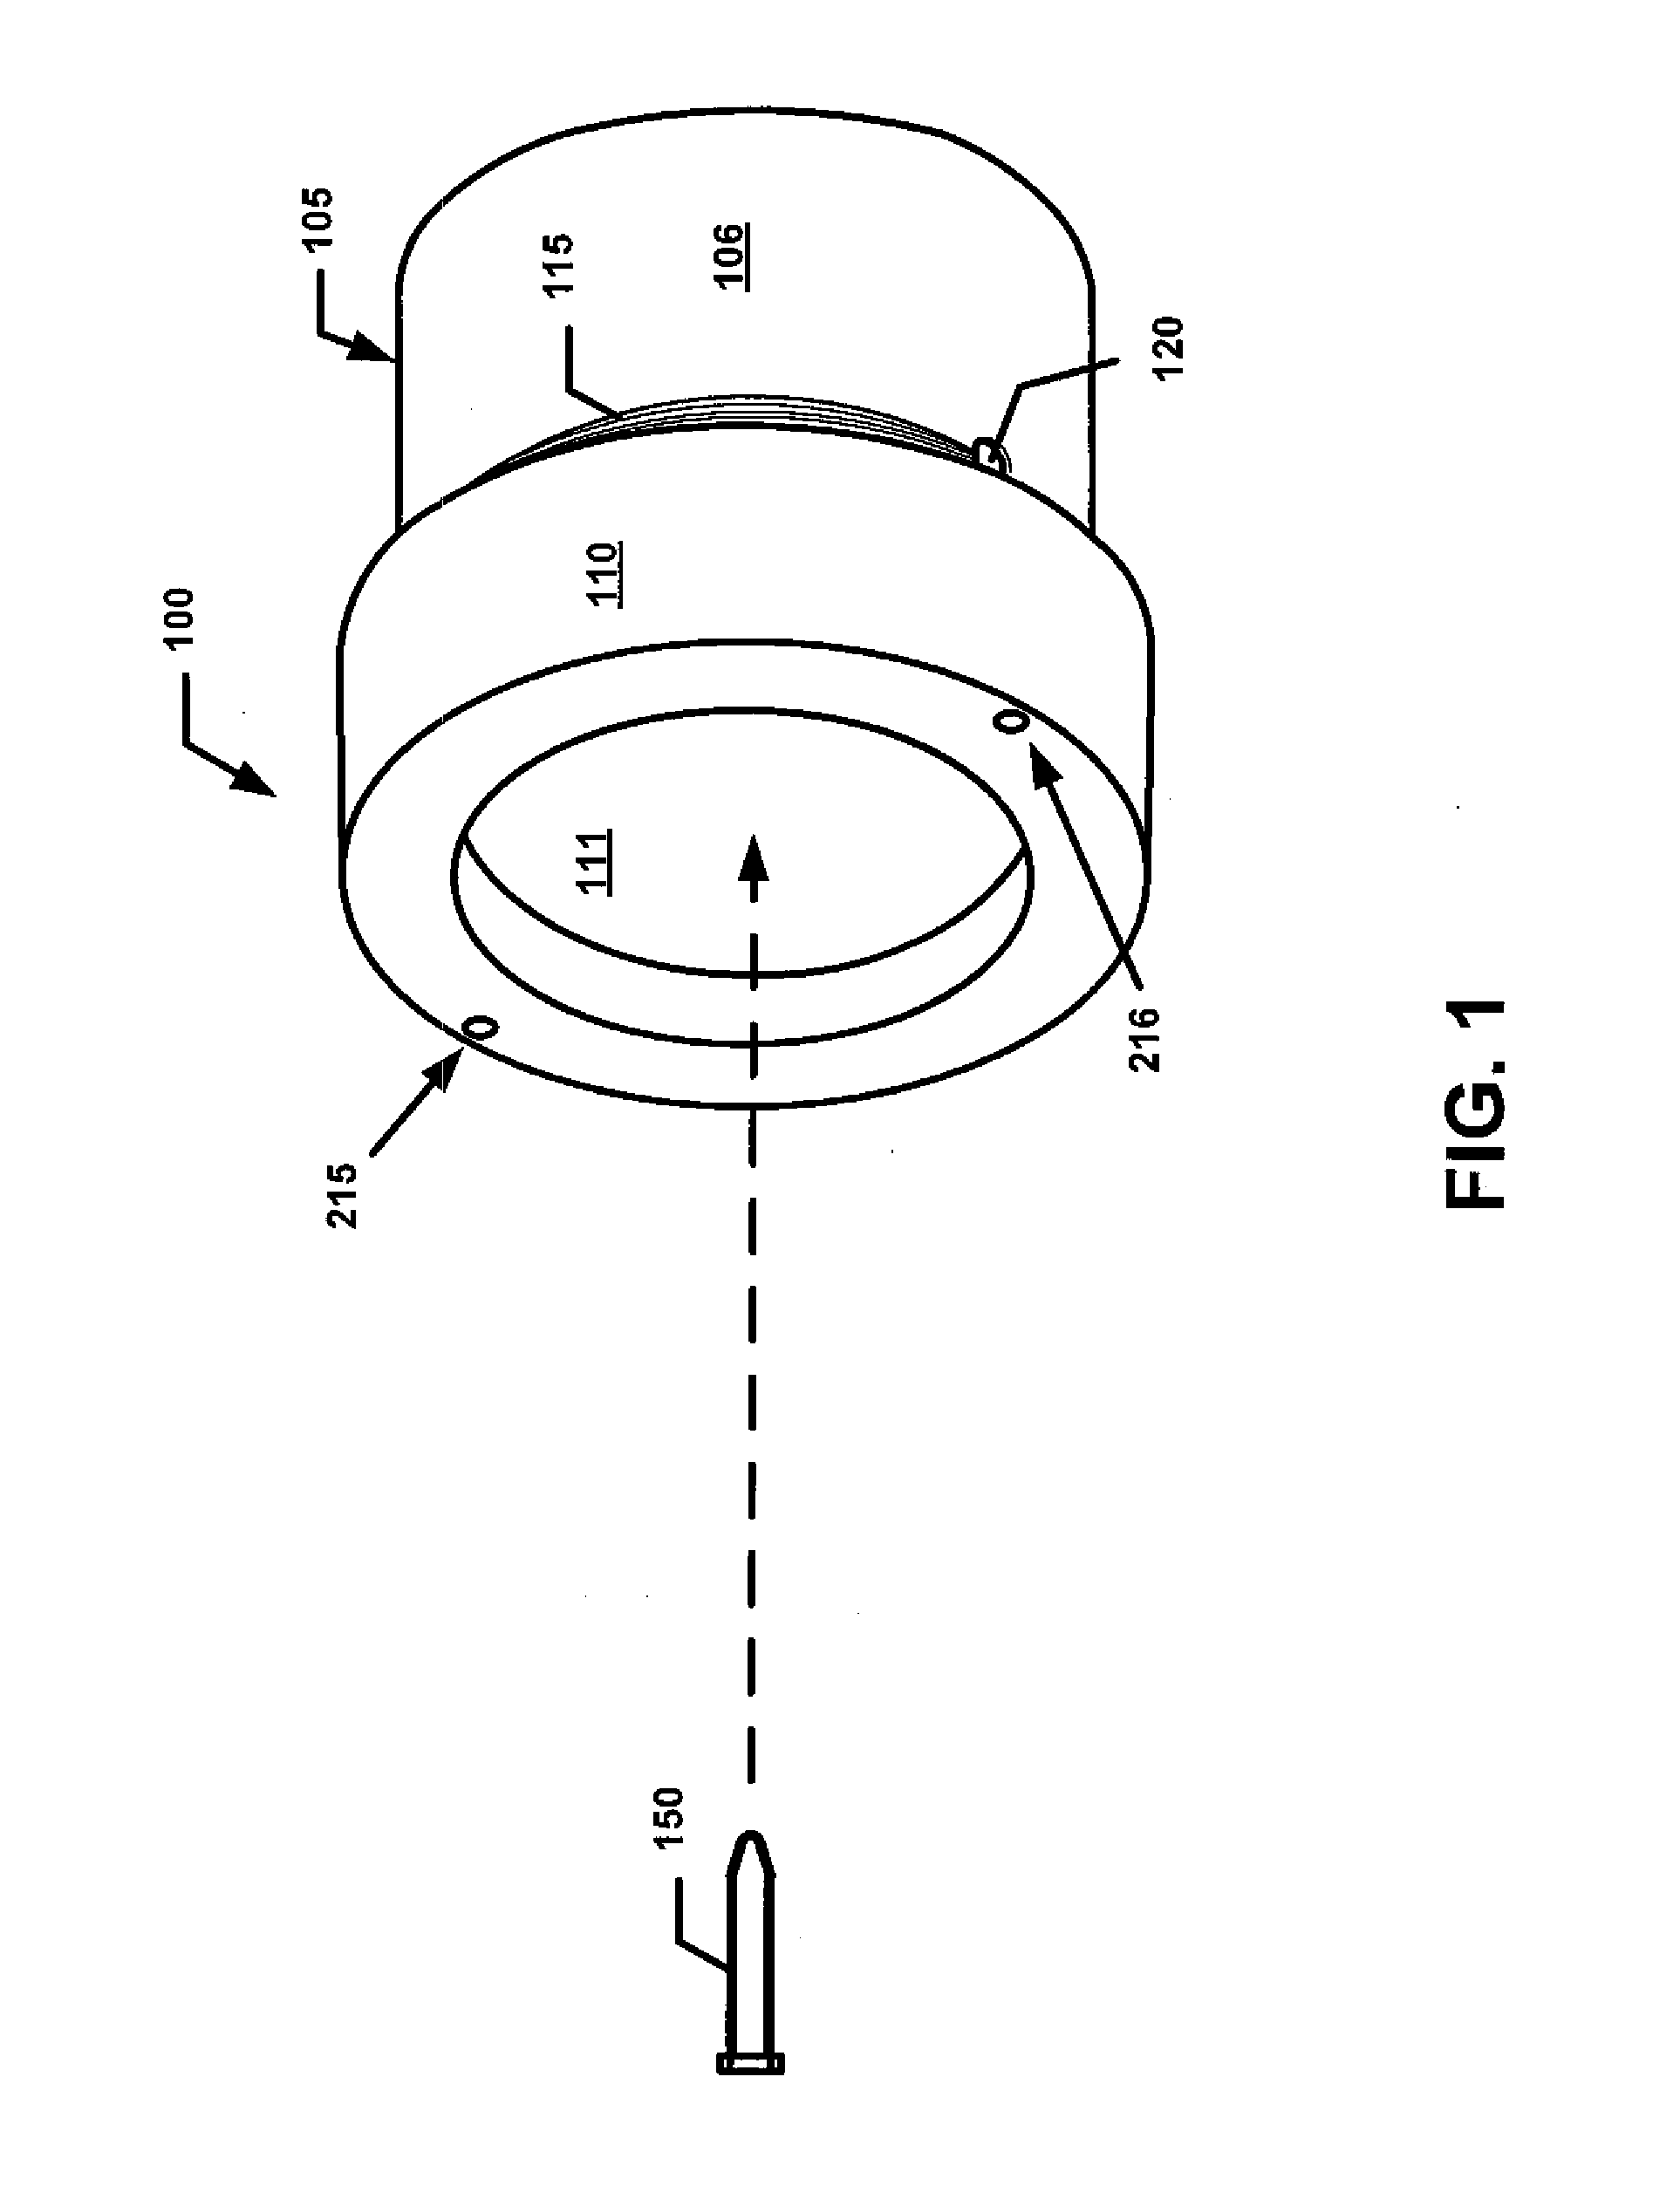 Assembly and method for standardized insensitive munitions testing